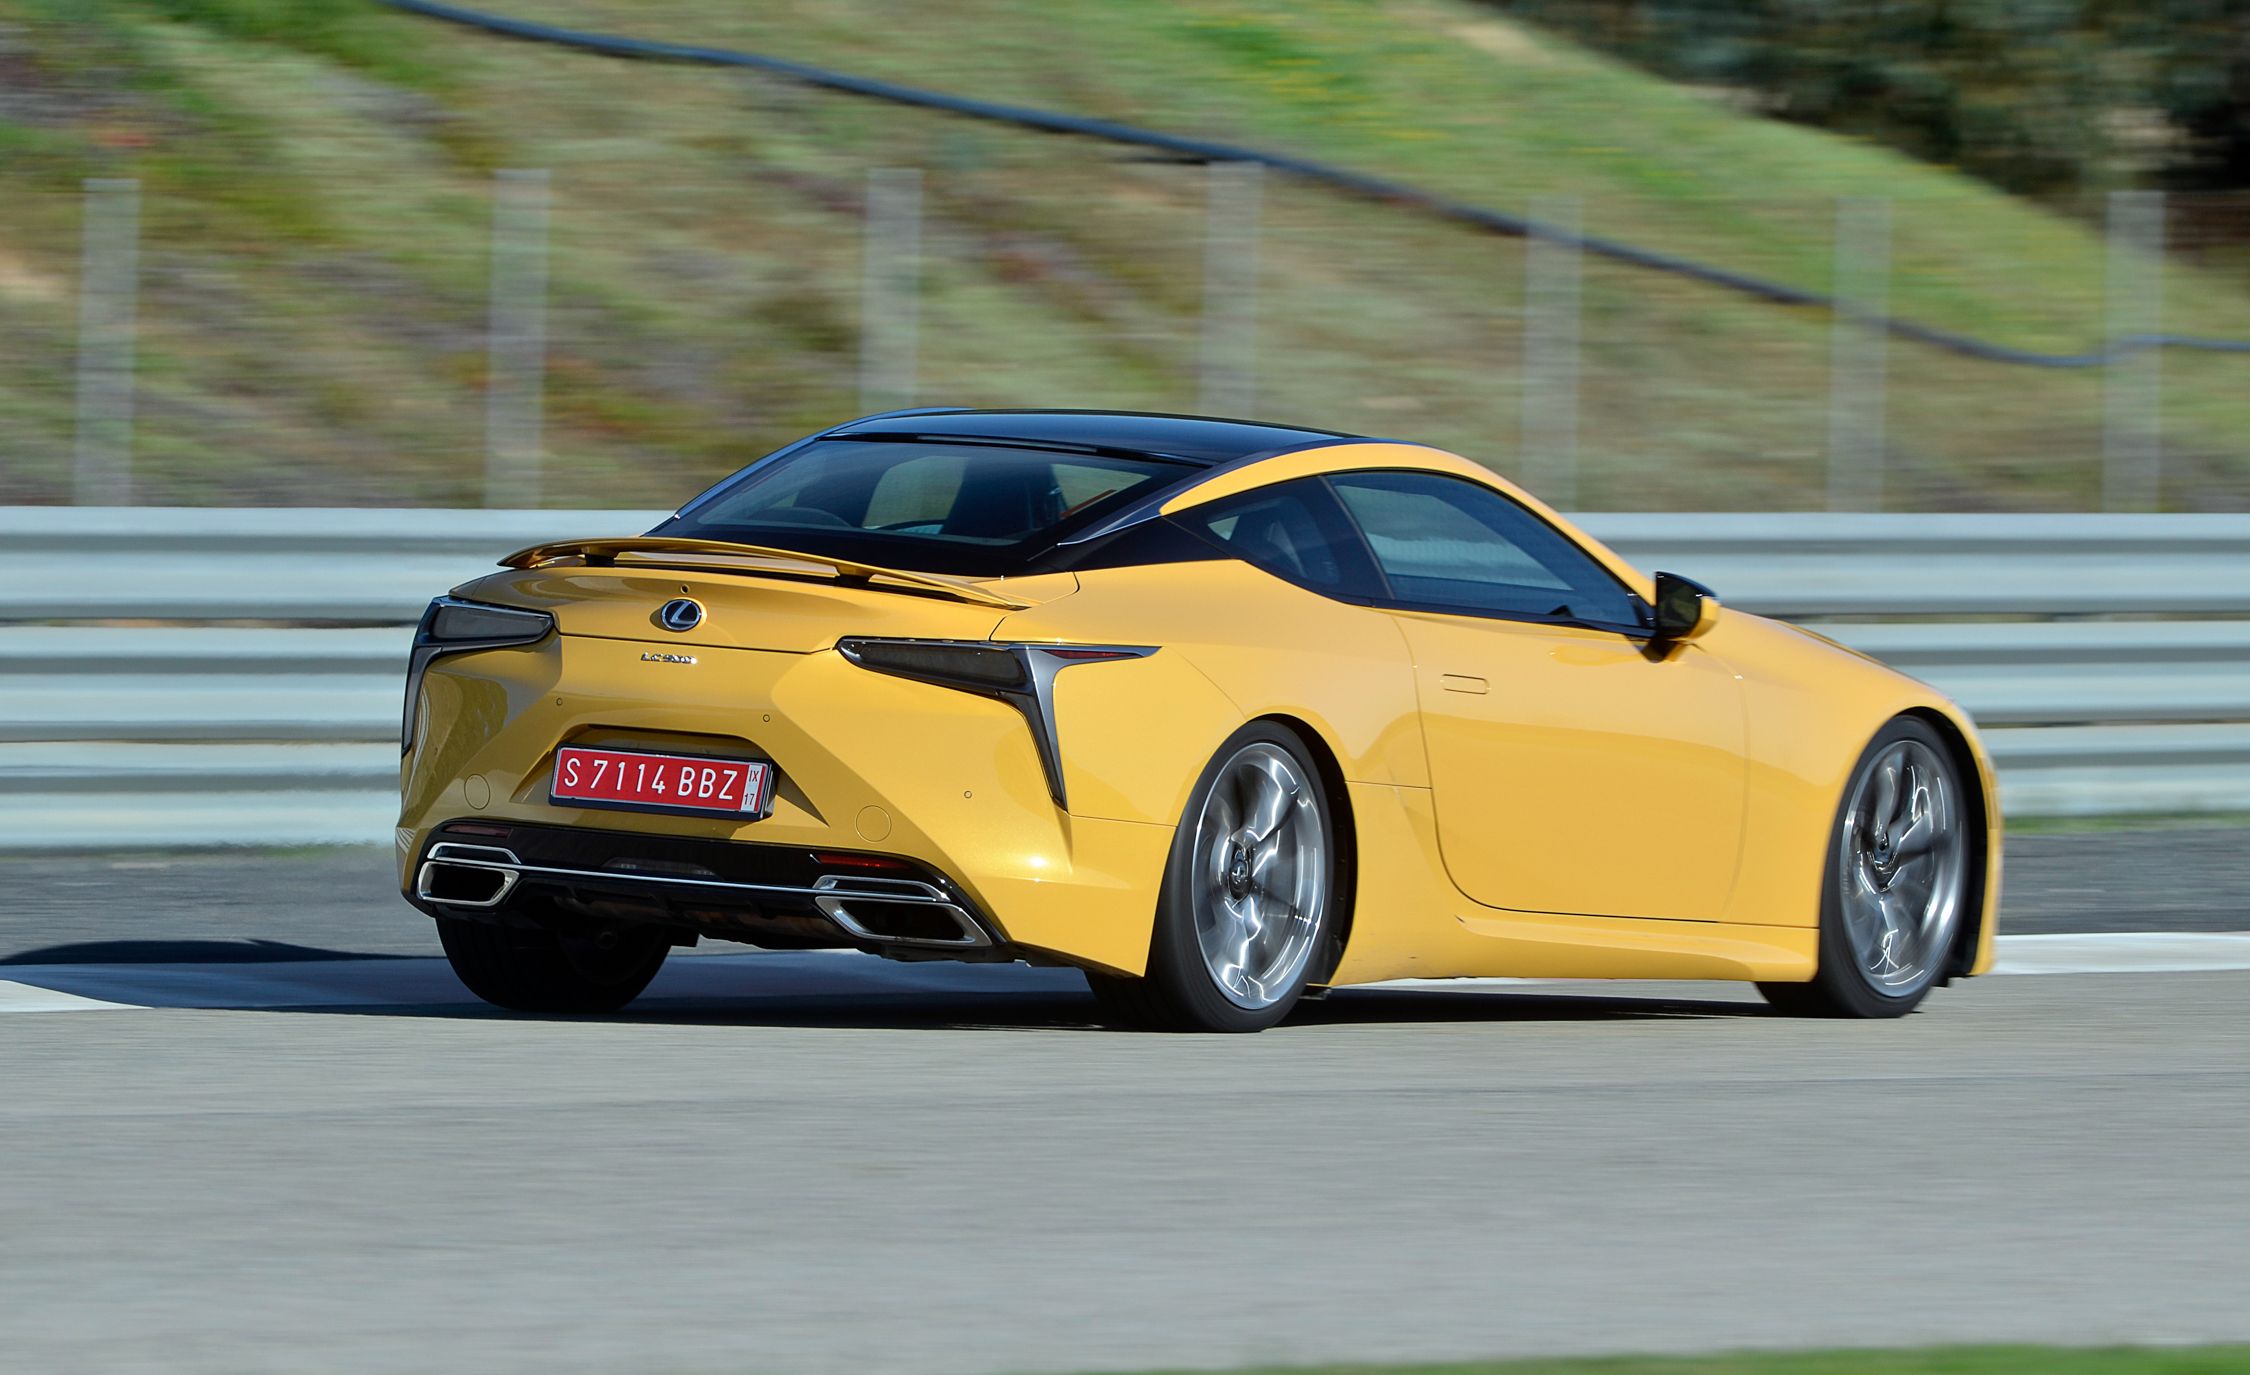 2018 Lexus Lc 500 Yellow Test Drive Rear And Side View (Photo 14 of 84)